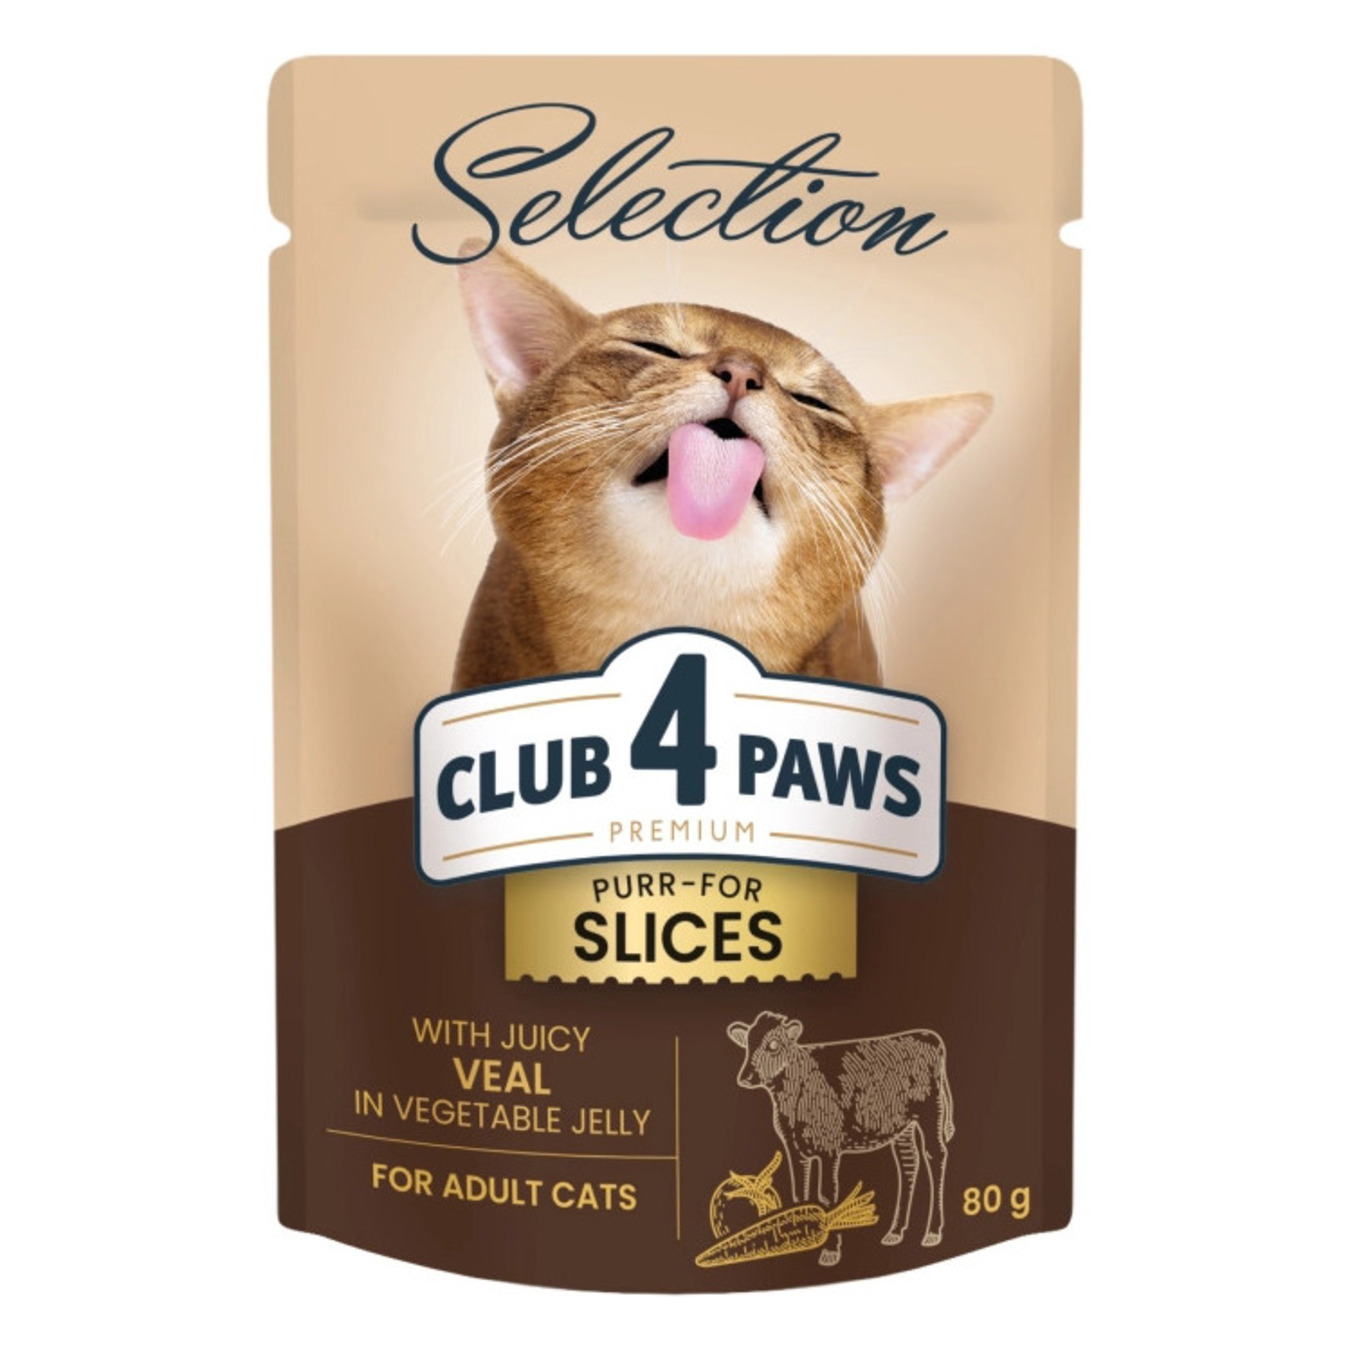 Club 4 Paws Premium Plus Selection feed for adult cats pieces with veal in vegetable jelly full ration canned 80g